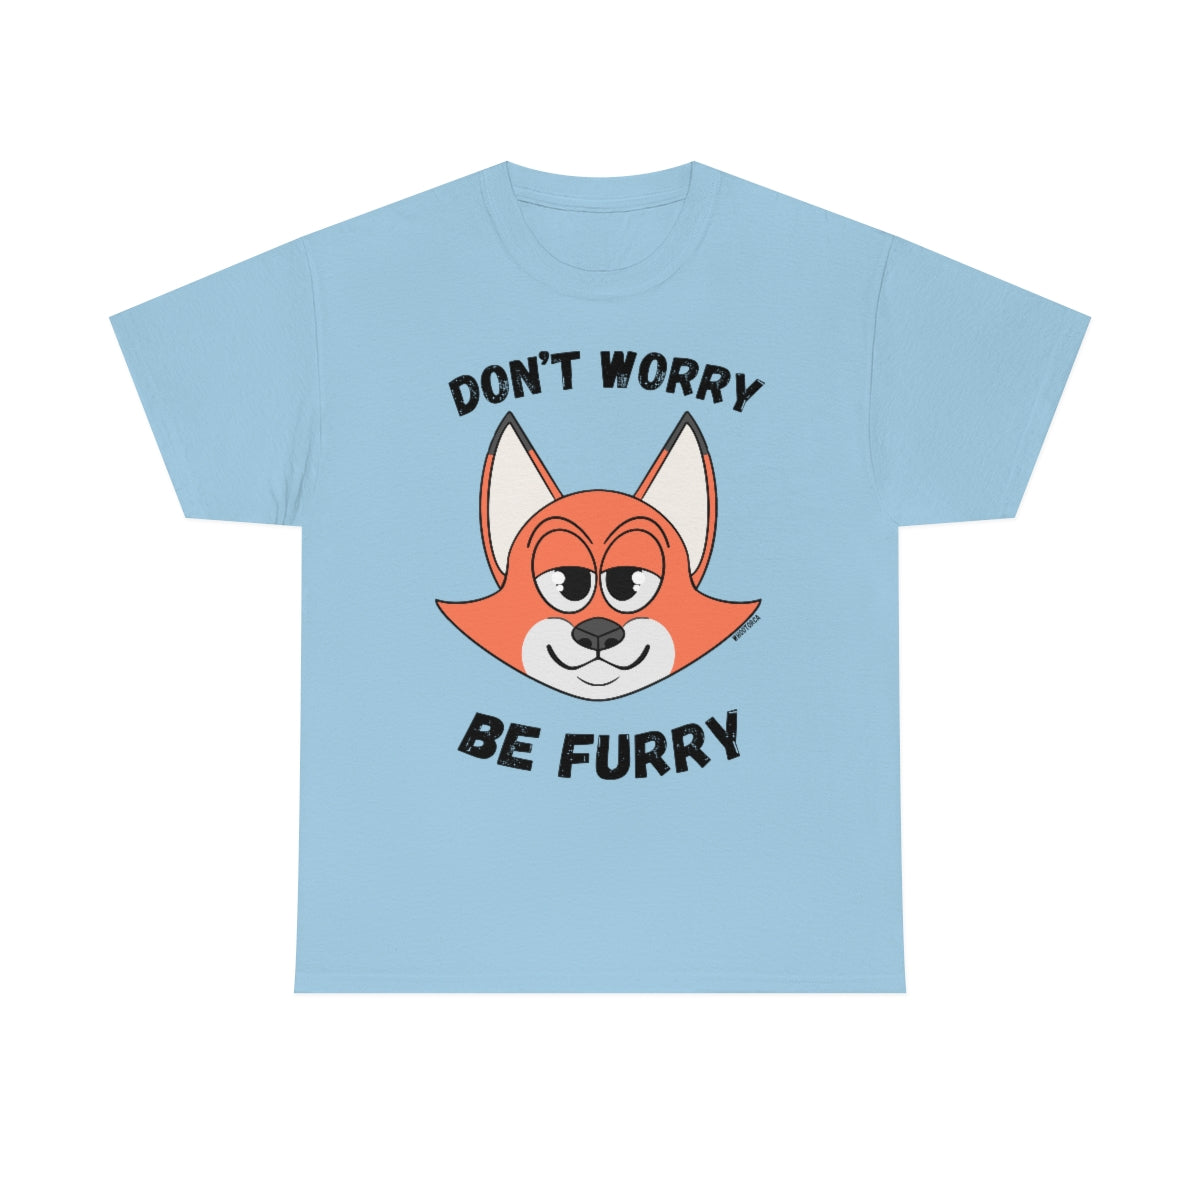 Don't Worry Be Furry! - T-Shirt T-Shirt AFLT-Whootorca Light Blue S 